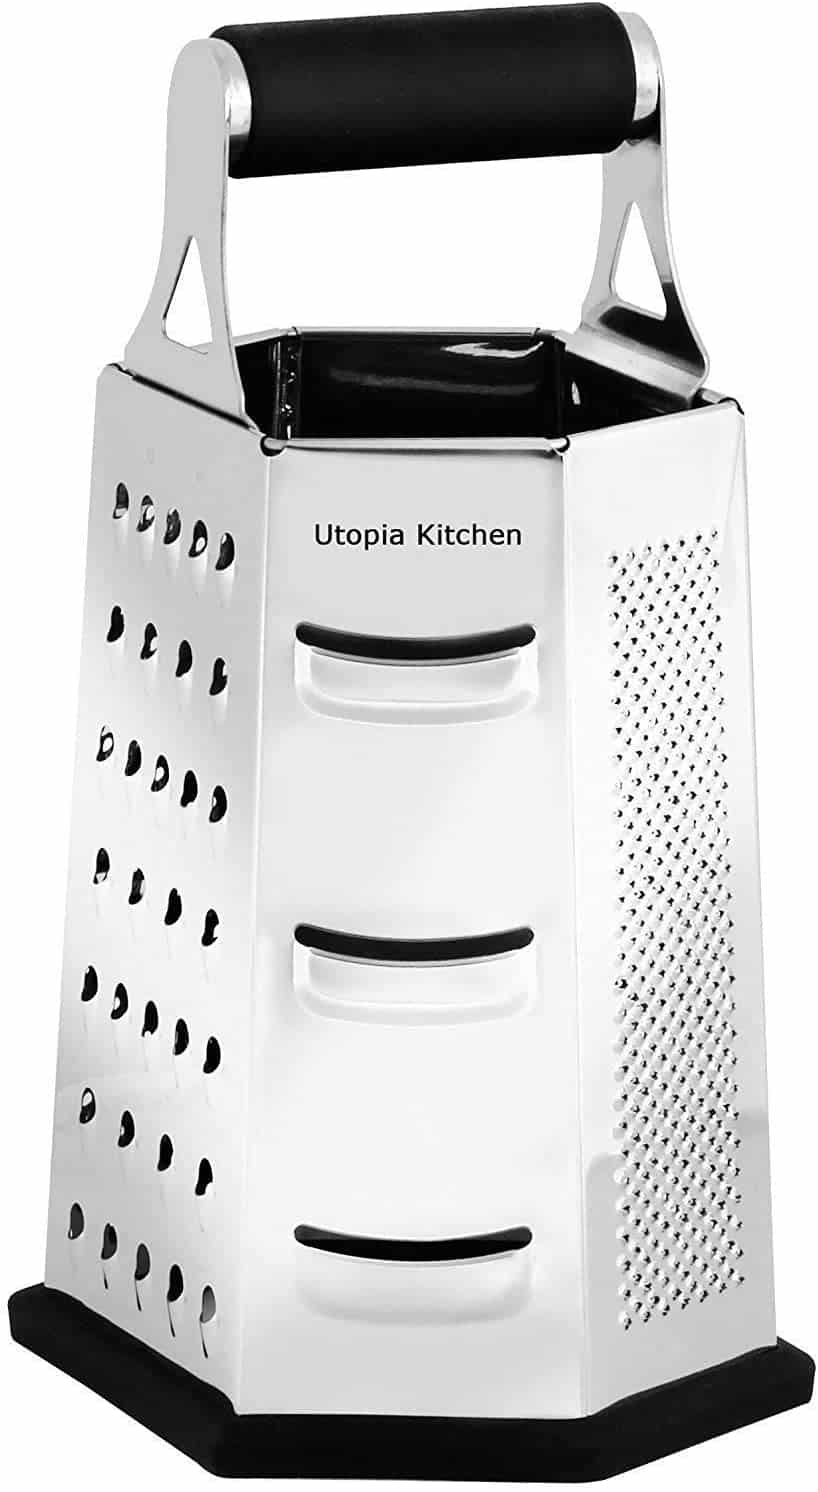 Utopia Kitchen Stainless Steel Cheese Grater